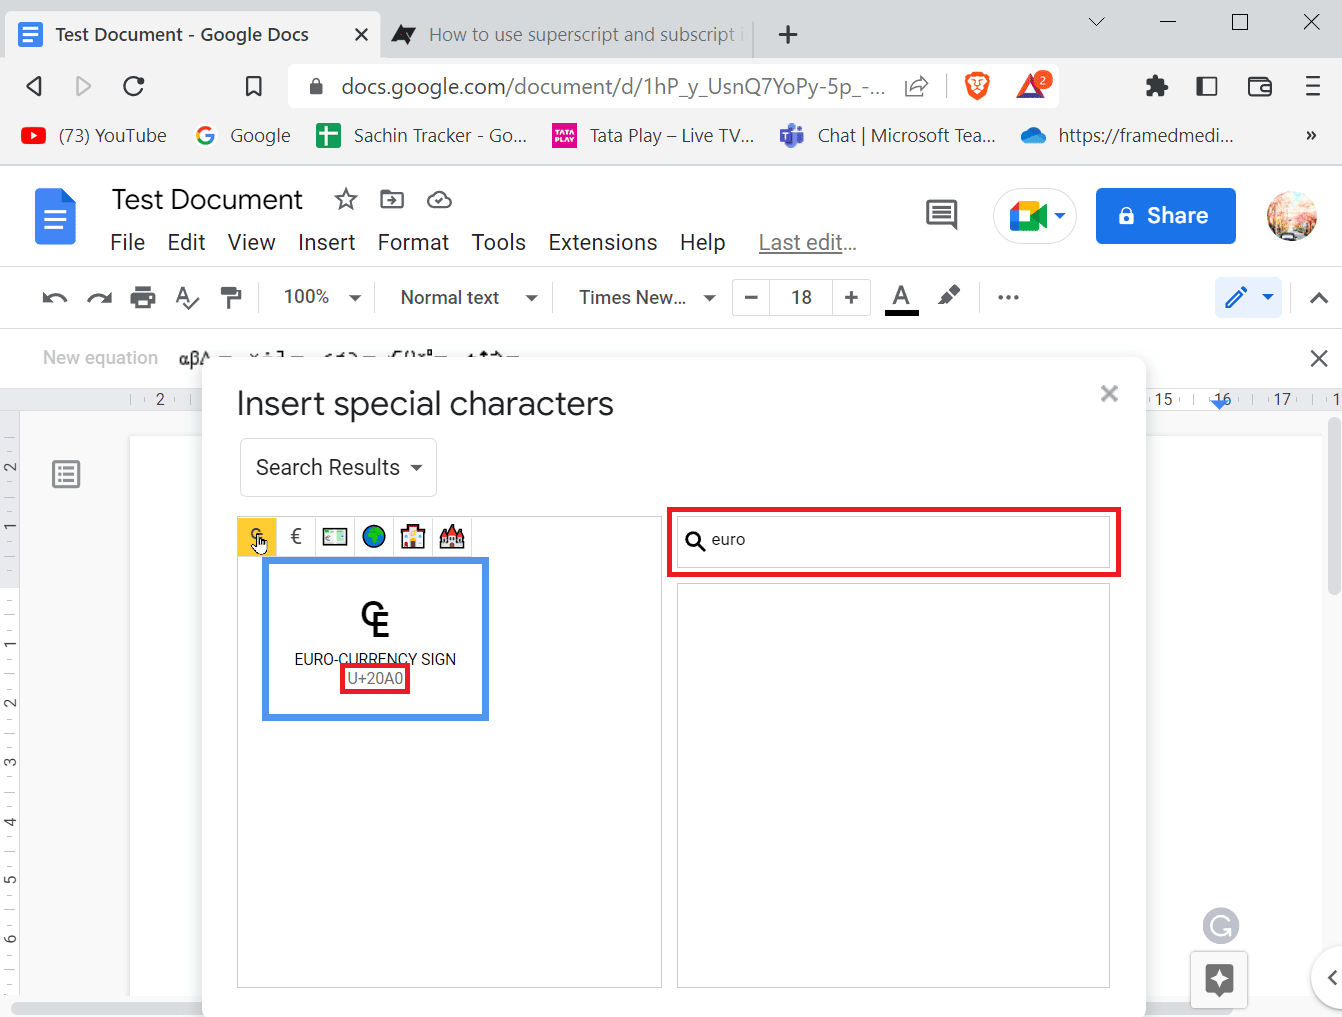 Hover your cursor over the symbol and note down the value that is present under the symbol.